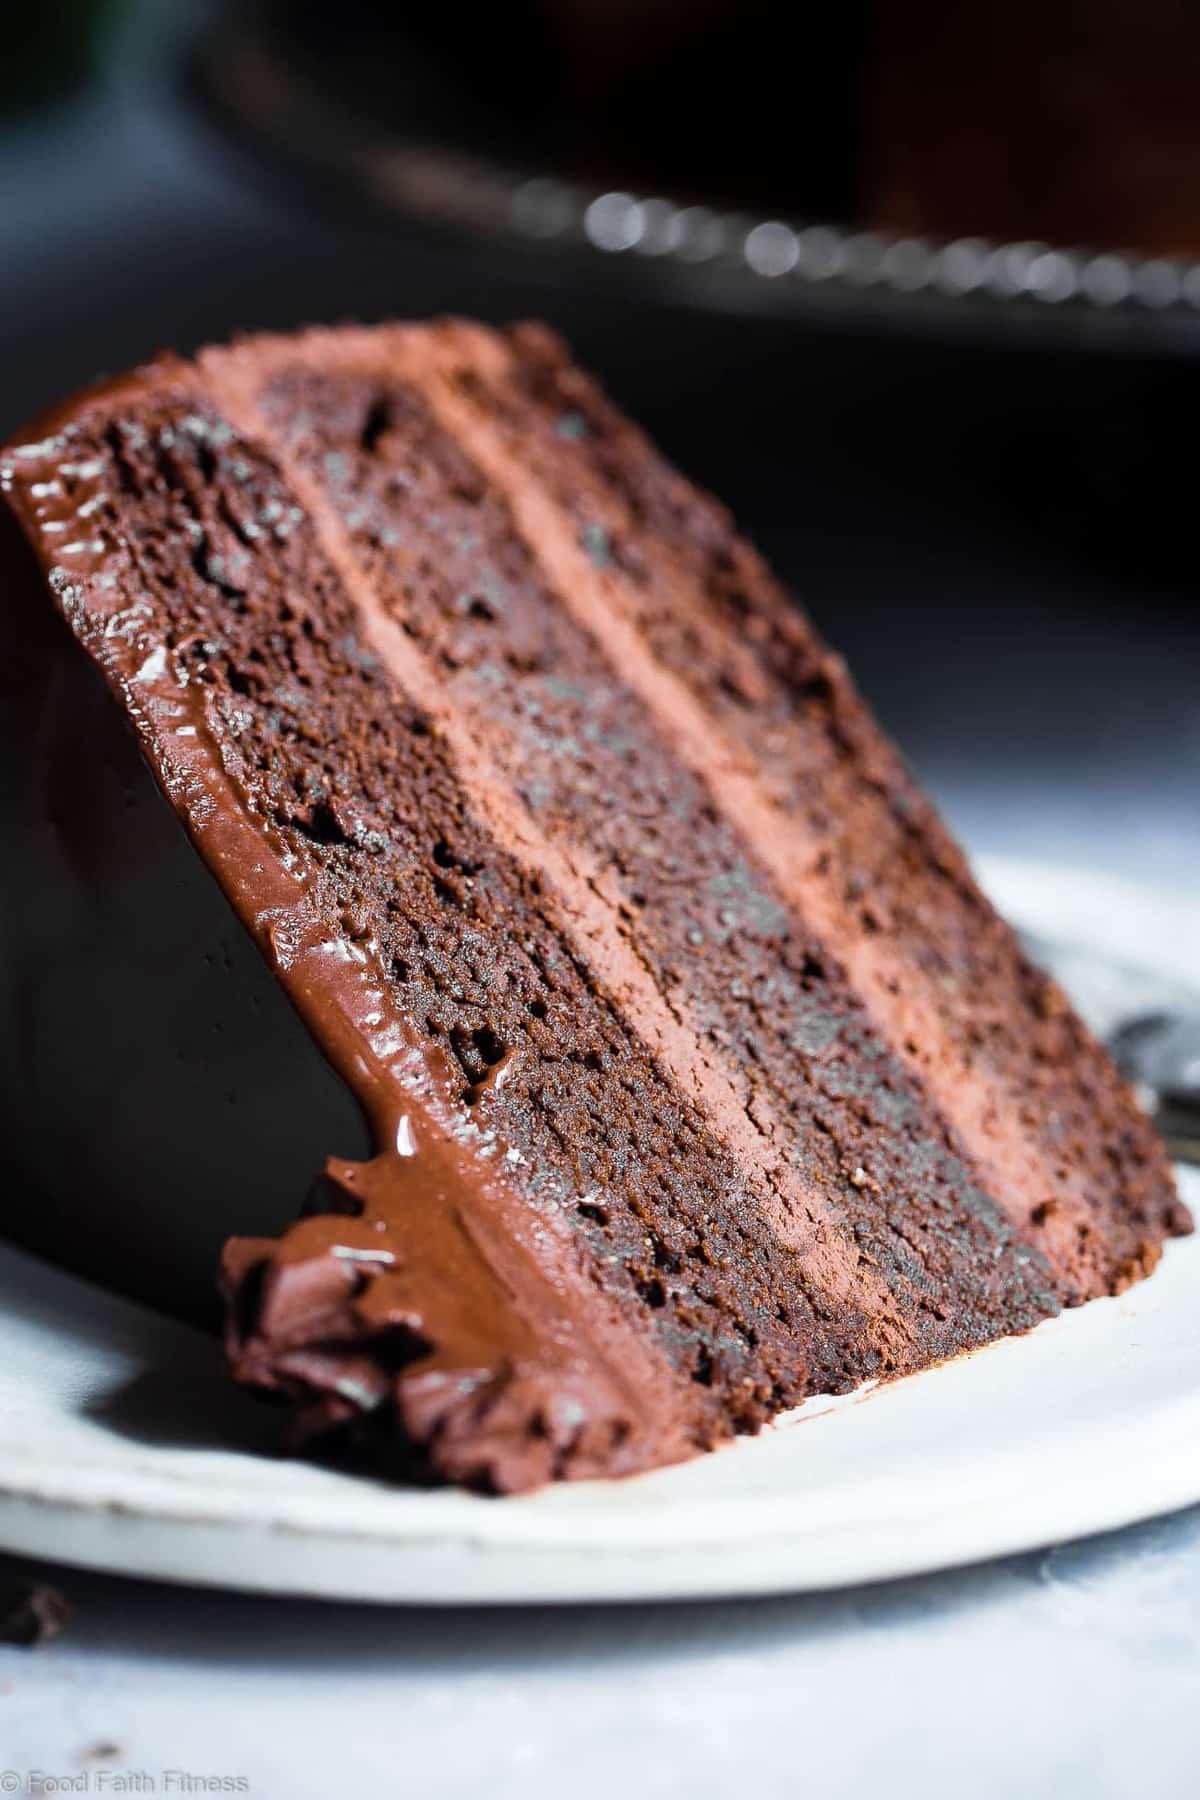 The Best Paleo Chocolate Avocado Cake - This dairy and gluten free Chocolate cake is SO fluffy and moist you'll never believe it's butter/oil free and made with avocado! The BEST healthy chocolate cake you will ever have! | #Foodfaithfitness | #Paleo #Grainfree #Dairyfree #Healthy #cake